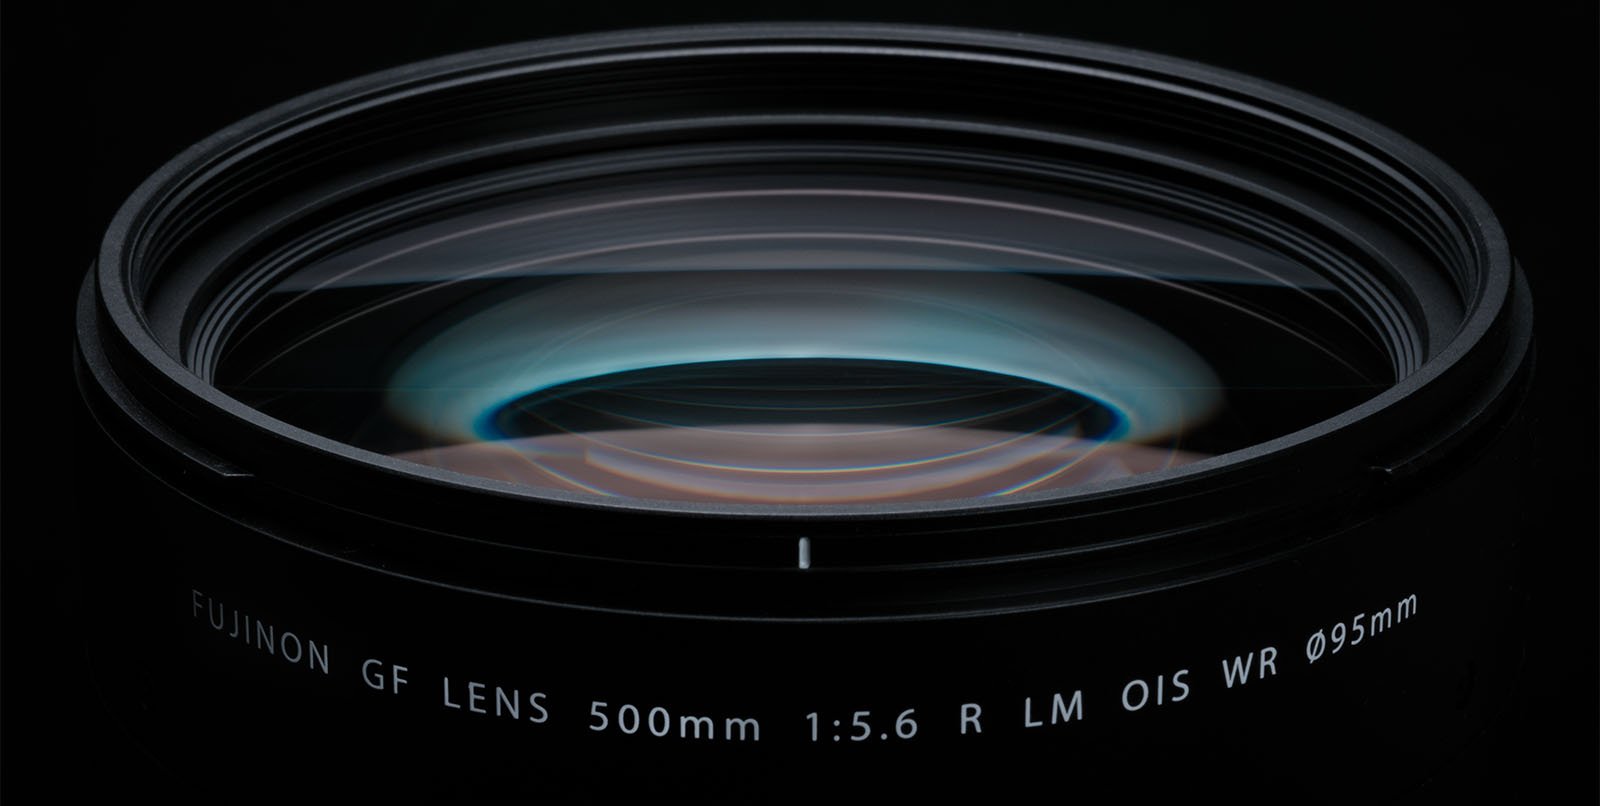 Close-up view of a camera lens showing the glass elements and reflecting light. The text on the lens reads "FUJINON GF LENS 500mm 1:5.6 R LM OIS WR Ø95mm." The image highlights the intricate details of the lens construction.